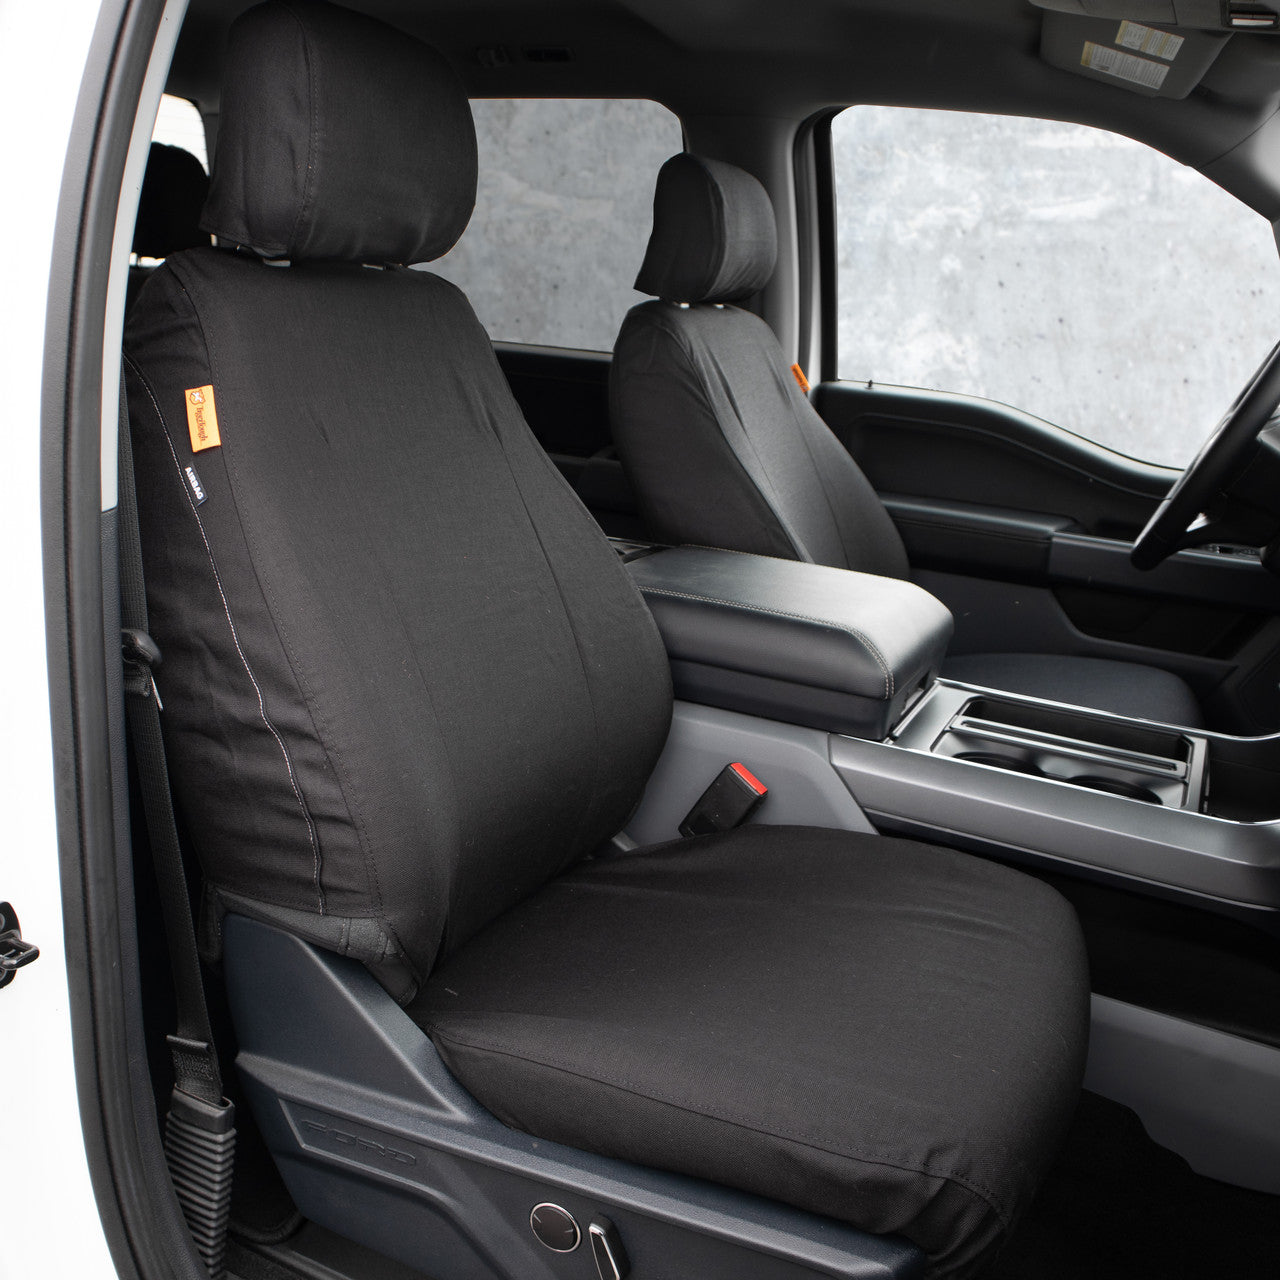 Tactical Driver's Seat Cover for Ford Truck (T52232)